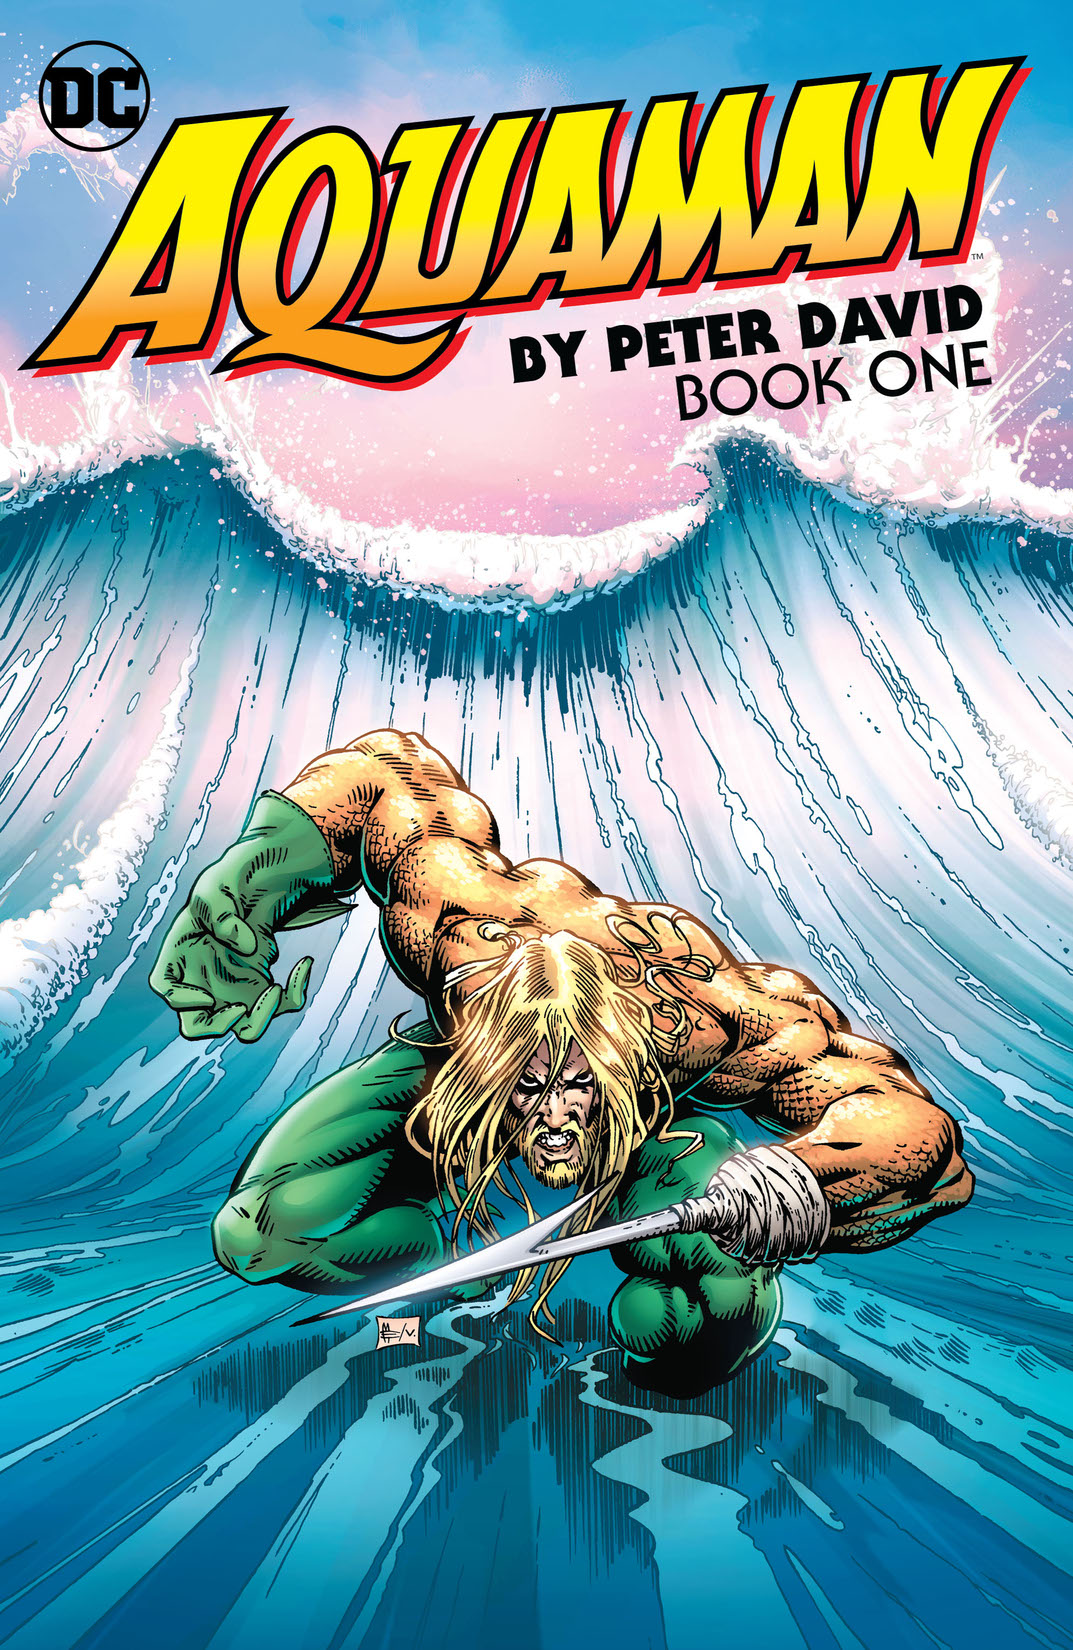 Aquaman by Peter David Book One preview images